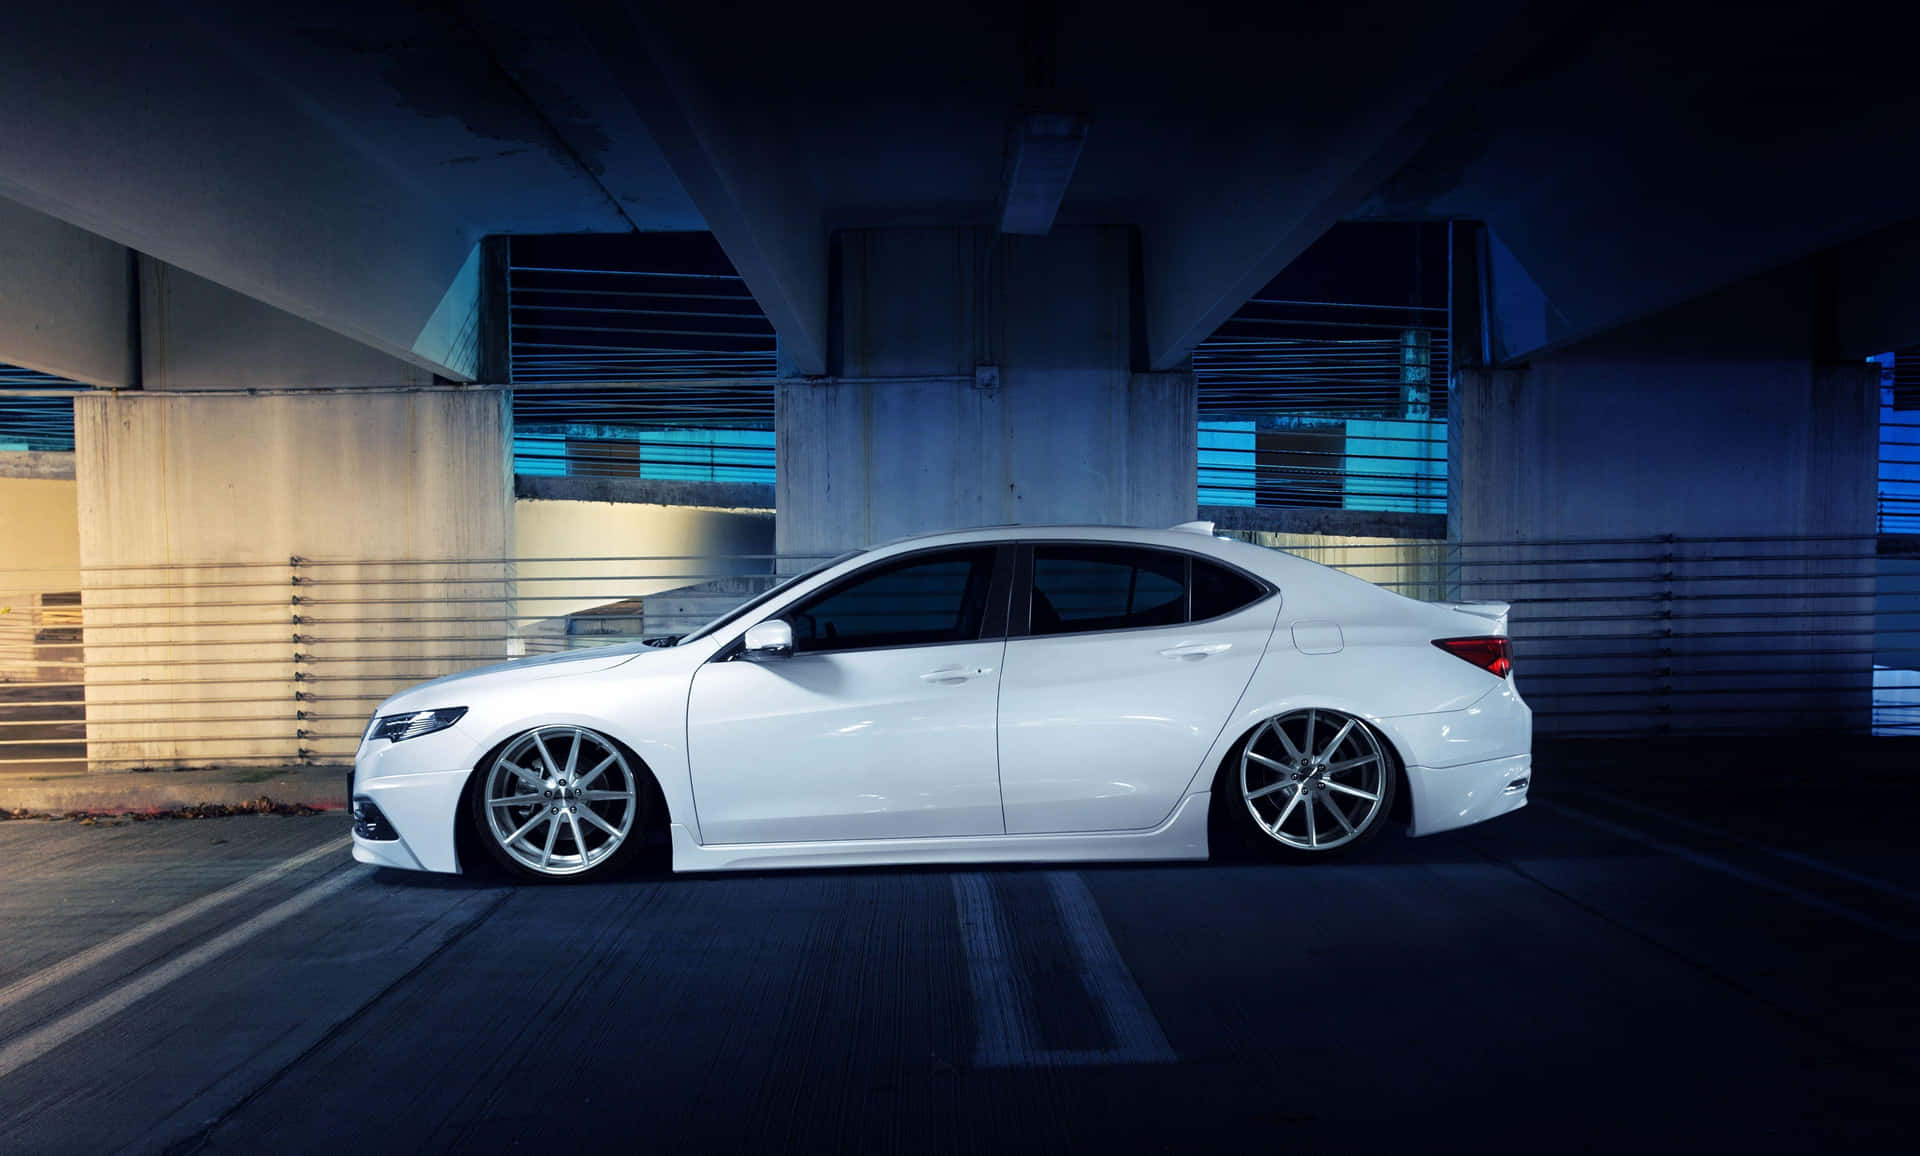 Elegance in Motion - The Acura TLX Wallpaper